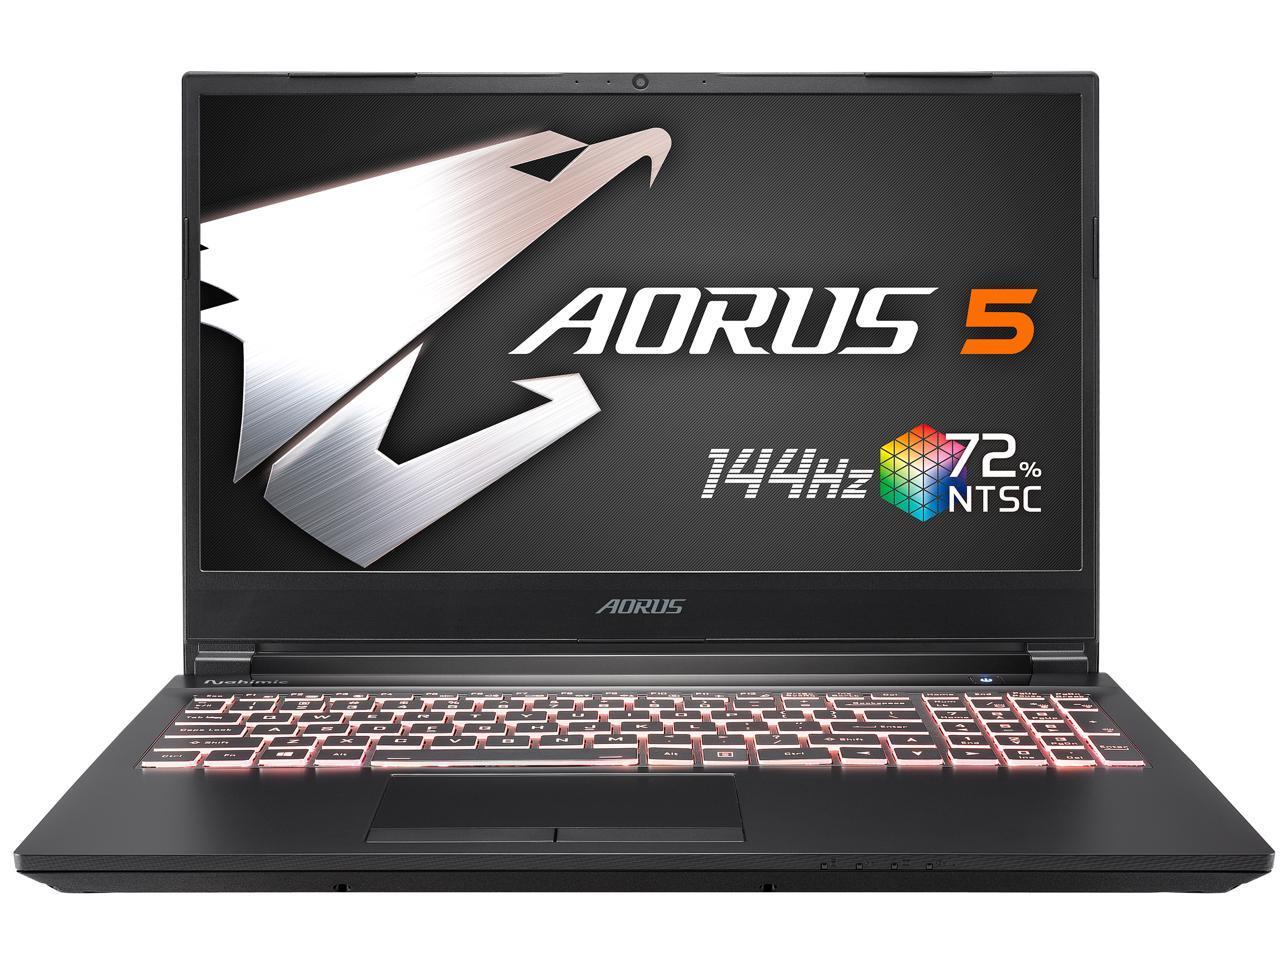 Gigabyte Aorus 5 15.6in i7 16GB 512GB Notebook Laptop for $999 Shipped